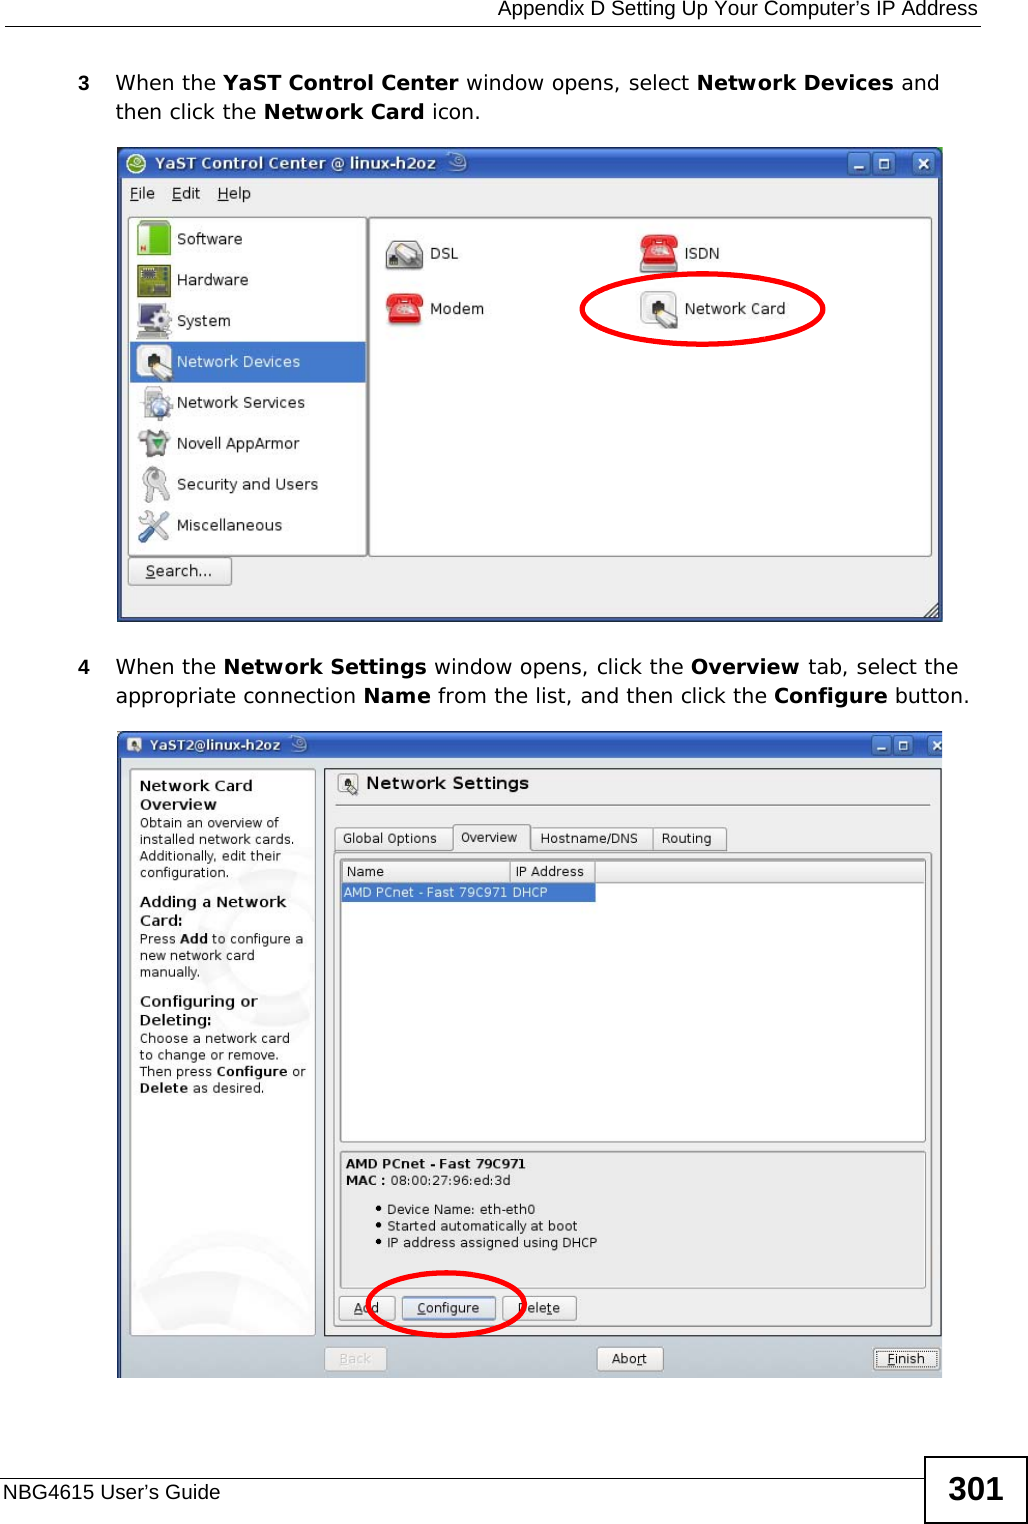  Appendix D Setting Up Your Computer’s IP AddressNBG4615 User’s Guide 3013When the YaST Control Center window opens, select Network Devices and then click the Network Card icon.4When the Network Settings window opens, click the Overview tab, select the appropriate connection Name from the list, and then click the Configure button. 